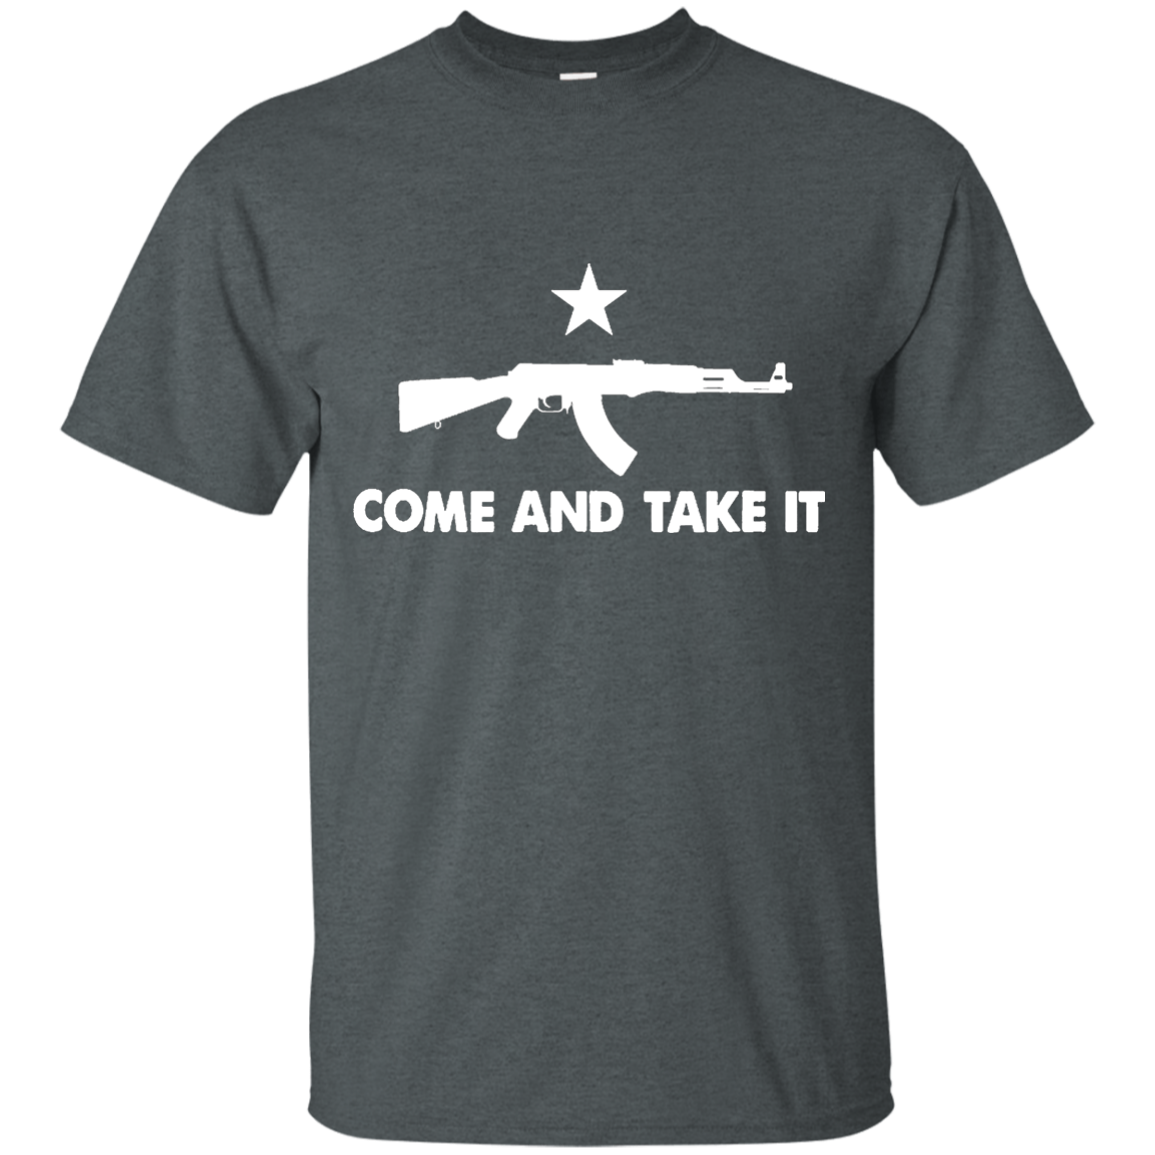 Come and Take It Shirt – PRW